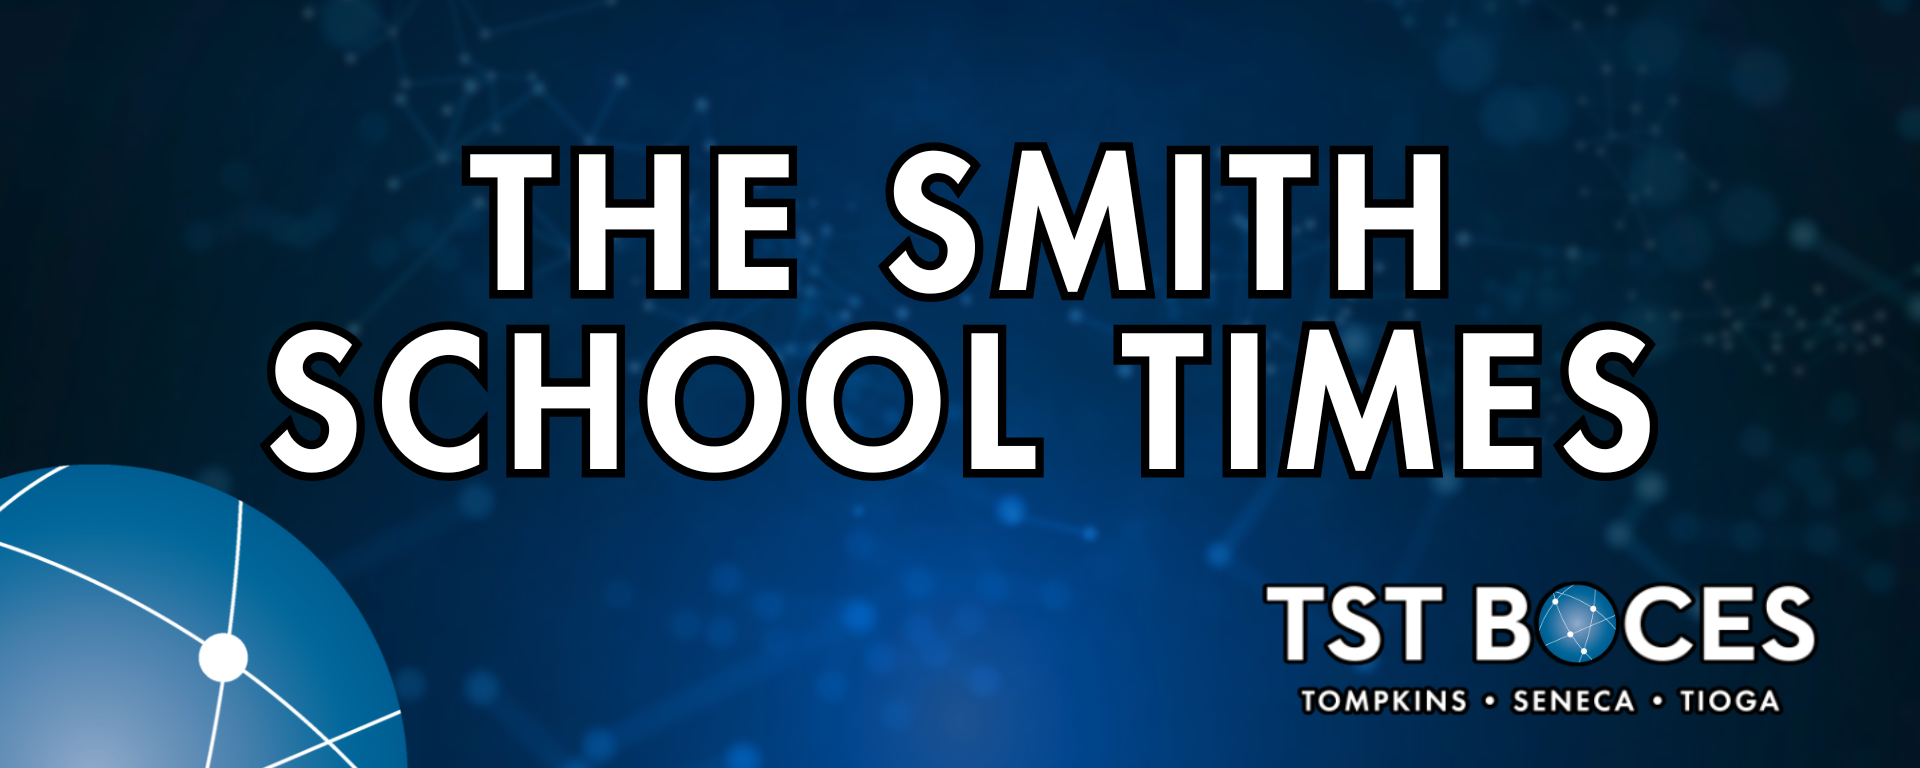 The Smith School Times Banner